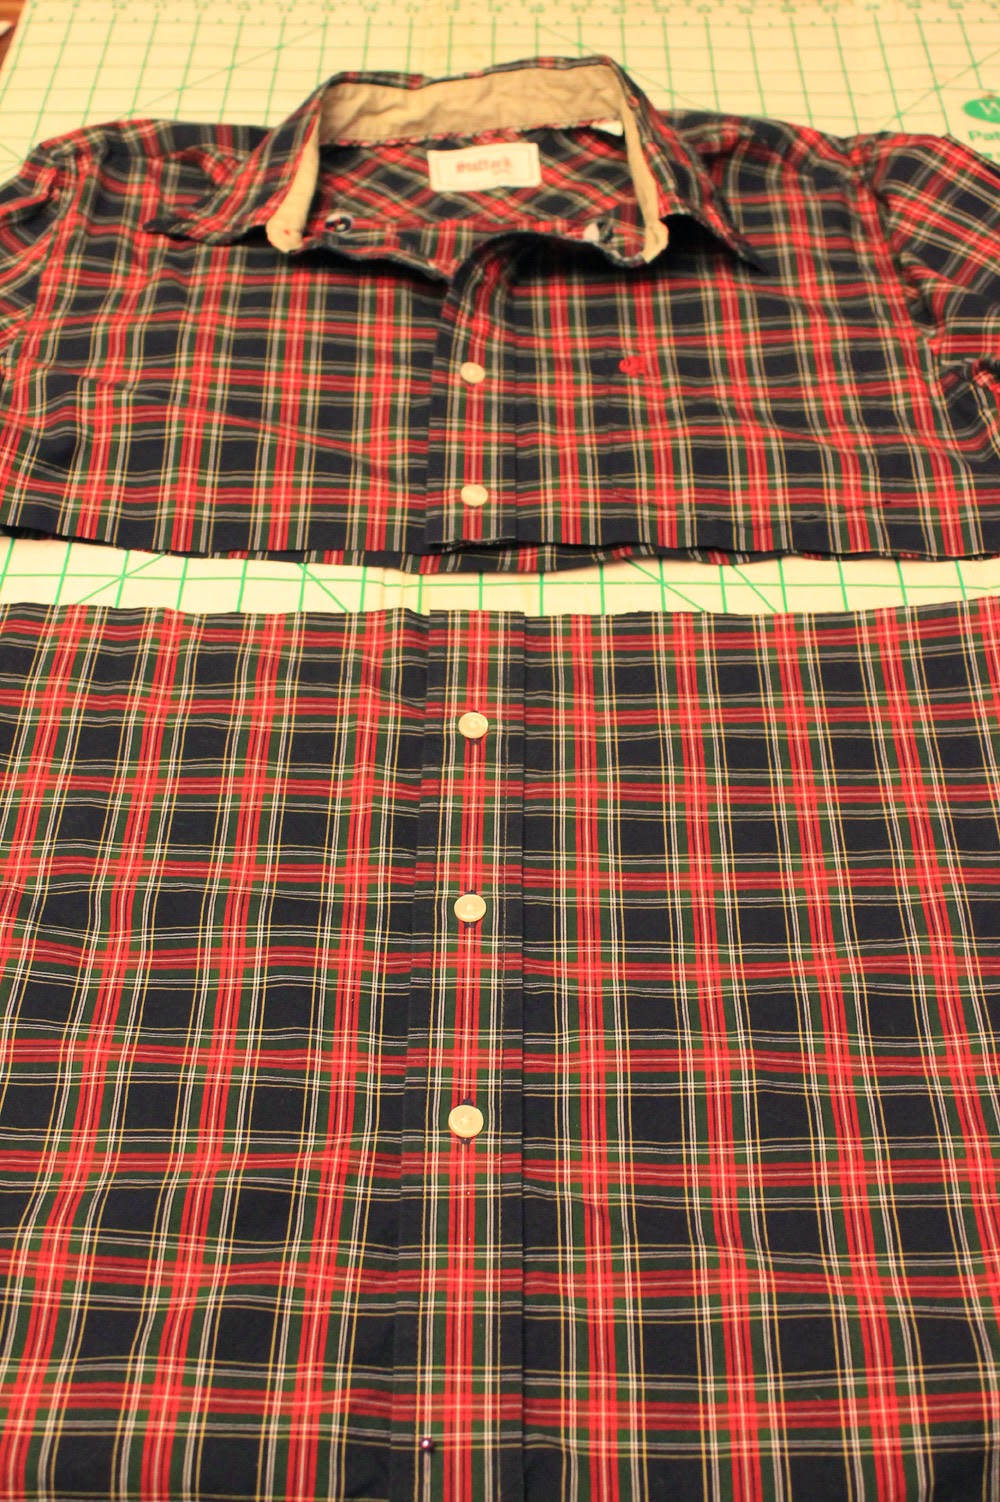 A Slice of Texas blog : PROJECT RECYCLE - Men's Used Shirt (DAY ONE)